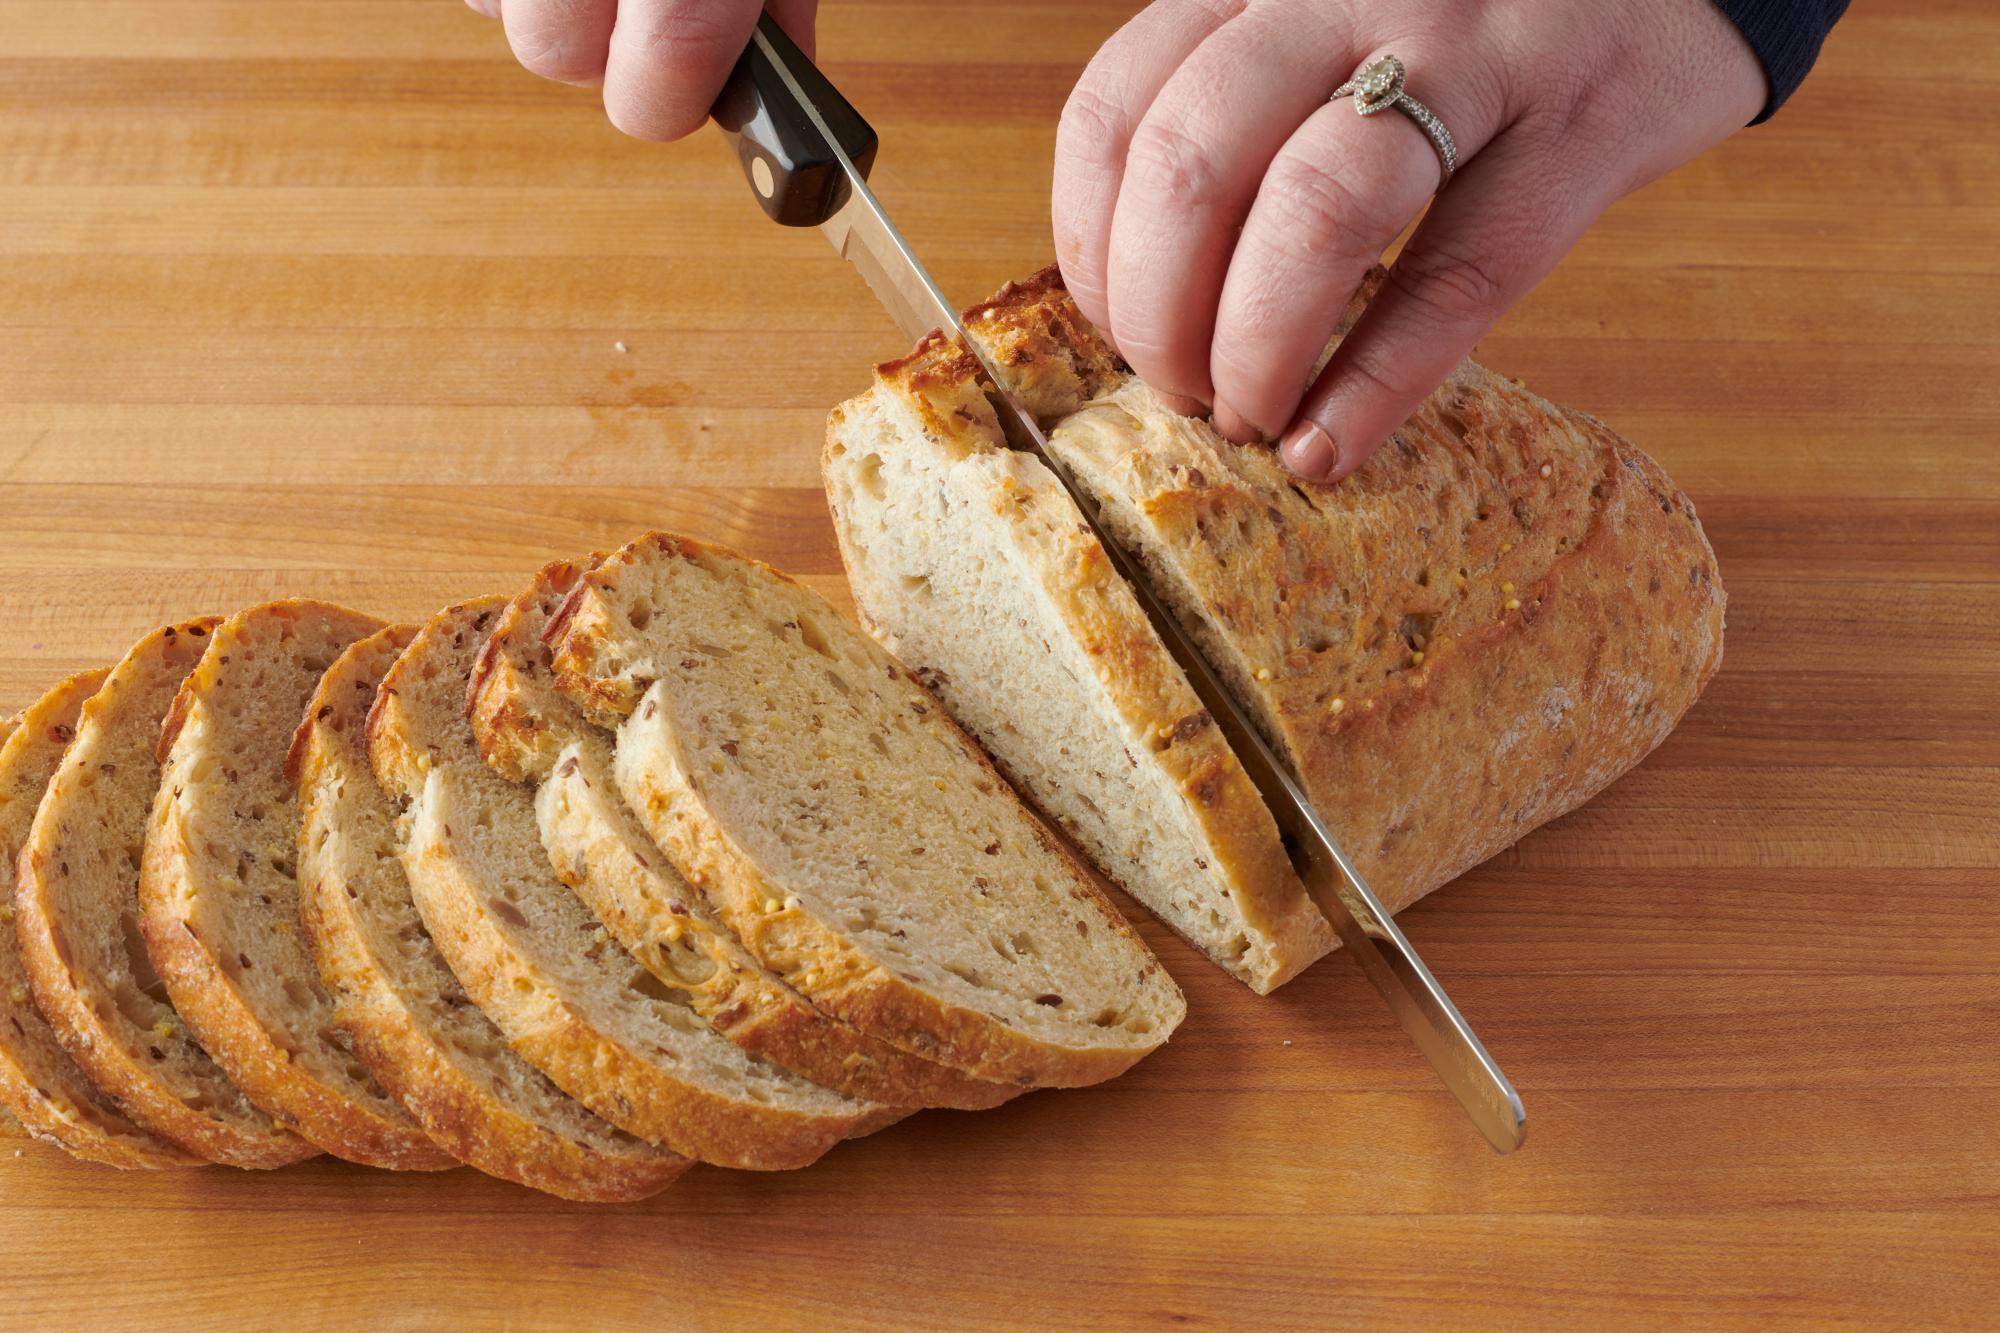 Slicing the bread with a Petite Slicer.